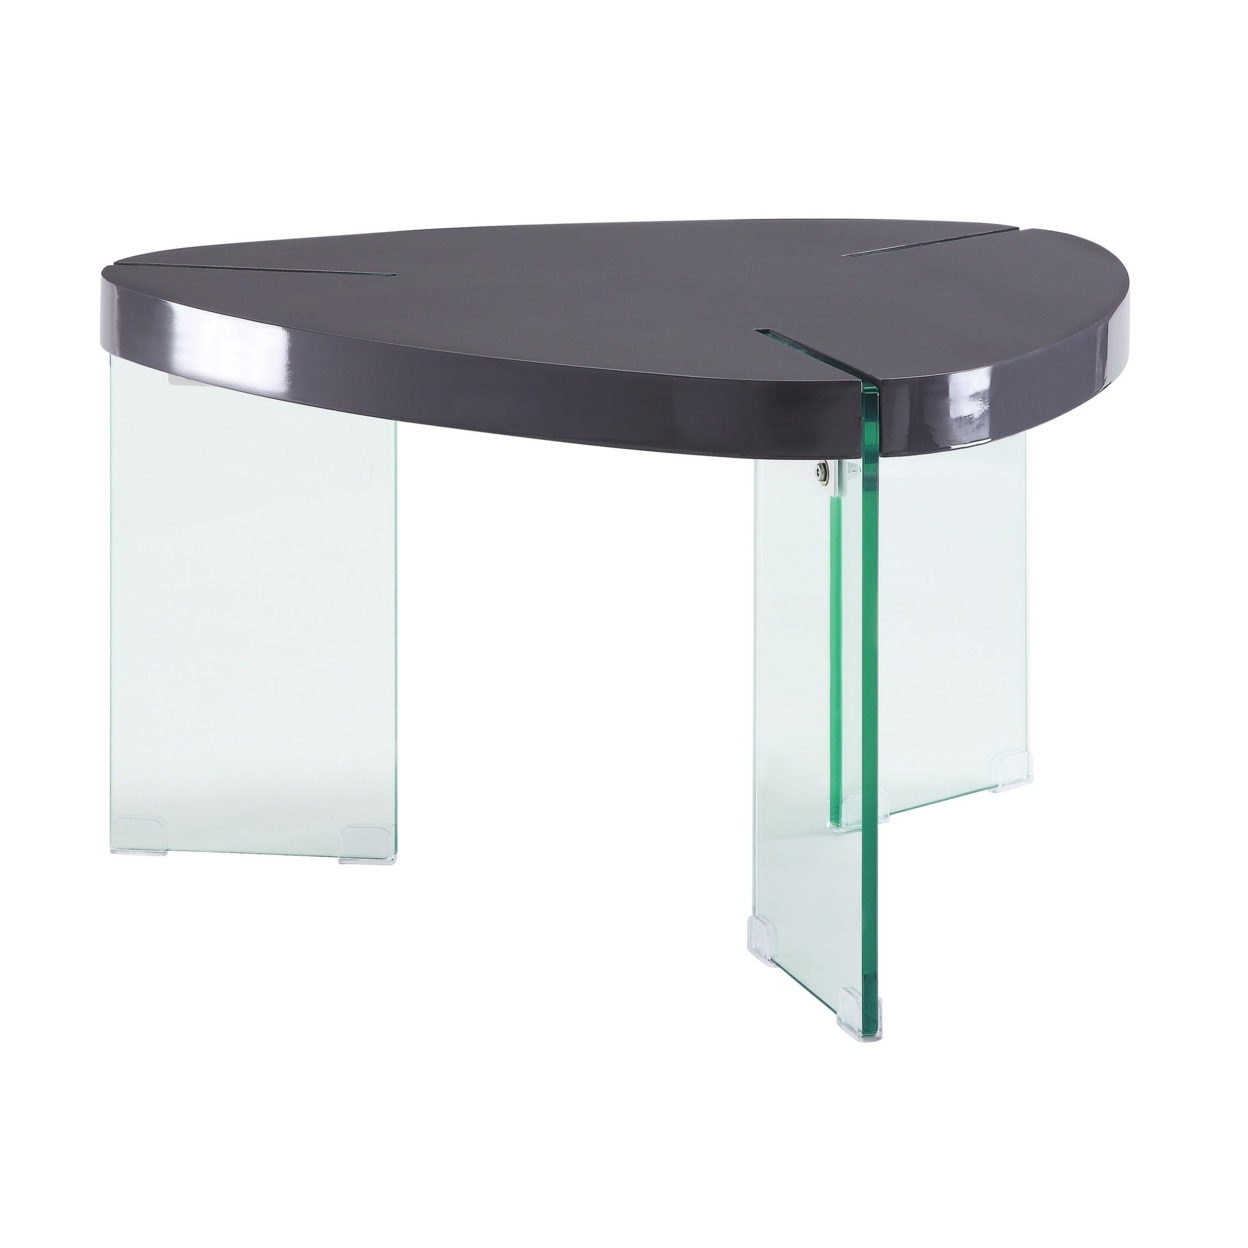 30 Inches Plectrum Top Coffee Table With Glass Legs, Gray- Saltoro Sherpi